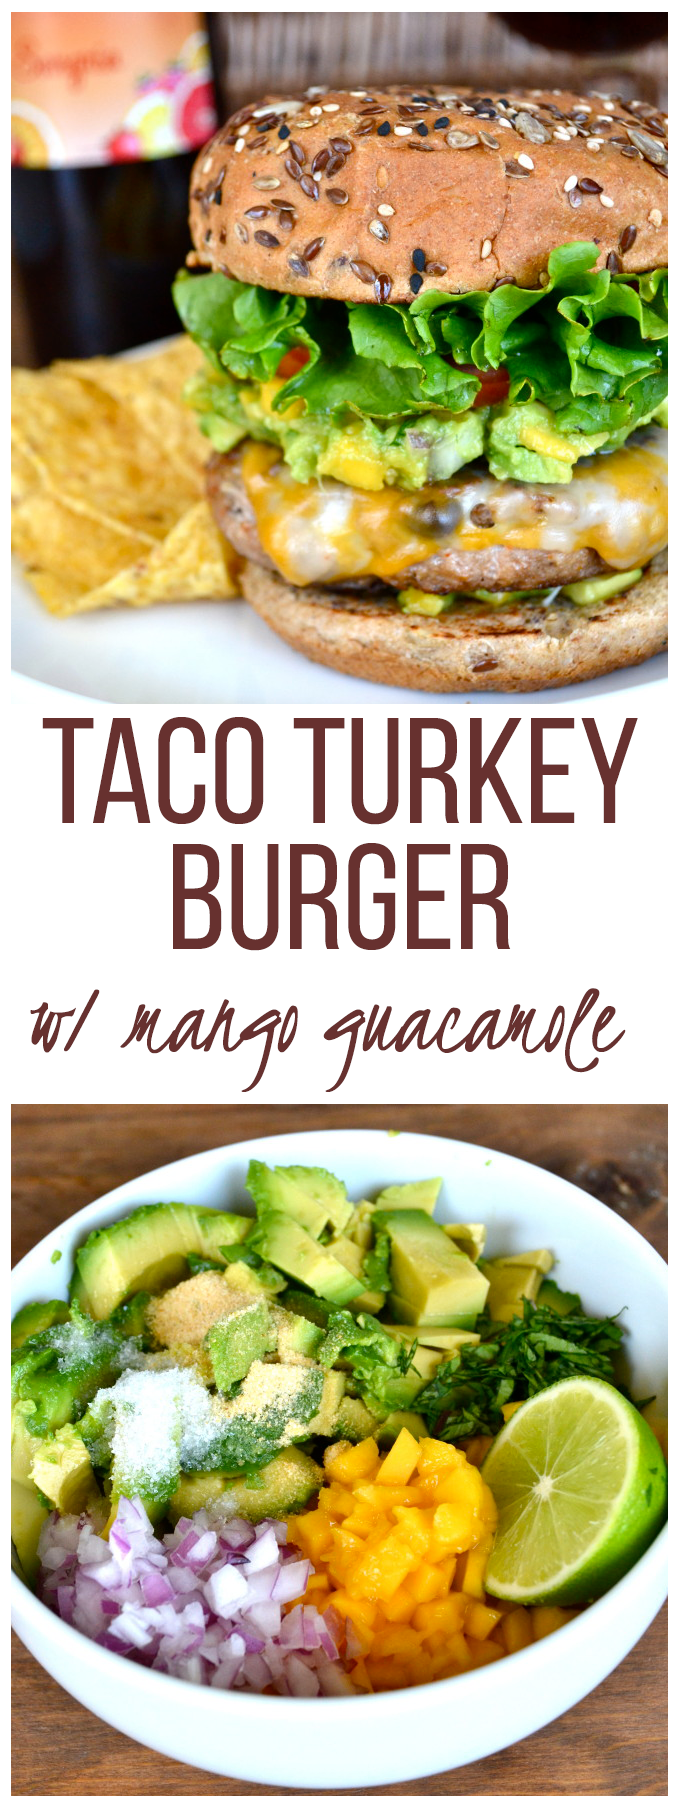 These Taco Turkey Burgers are the perfect way to mix up your weeknight ground turkey and use up a can of black beans! And Mango Guacamole is the perfect addition!